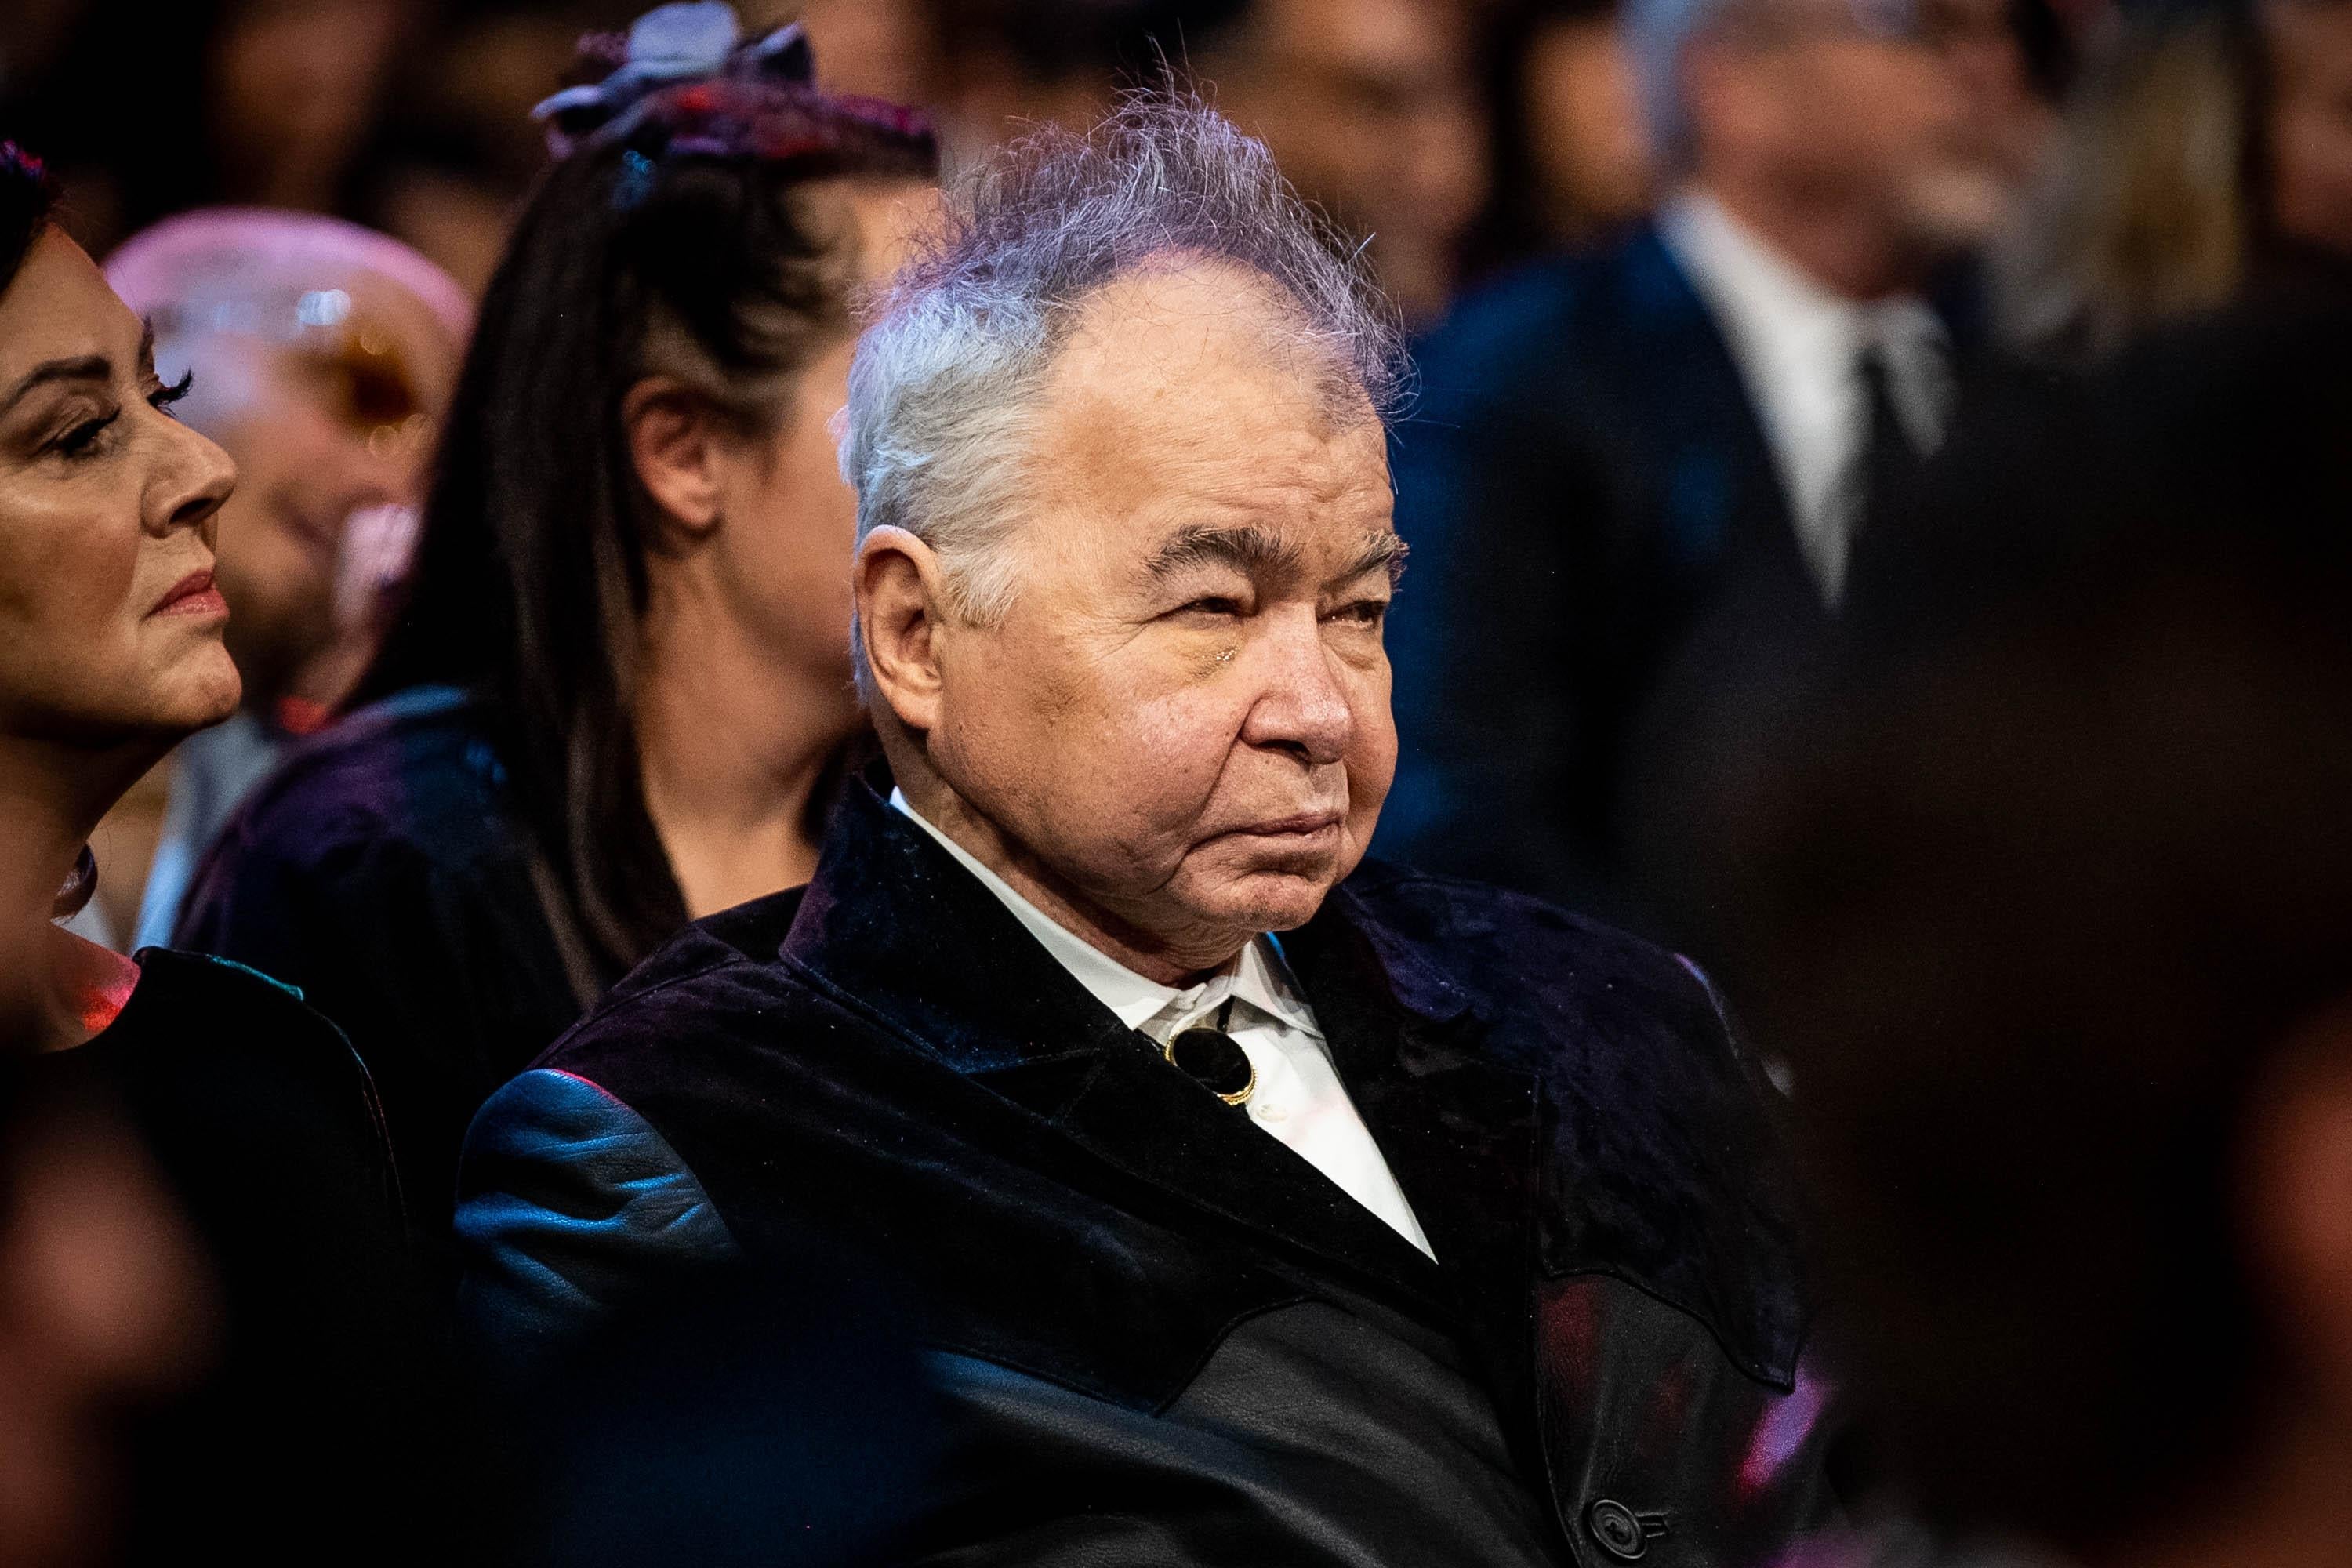 John Prine, in a velvet jacket and bolo tie, sitting in the audience at the Grammys.